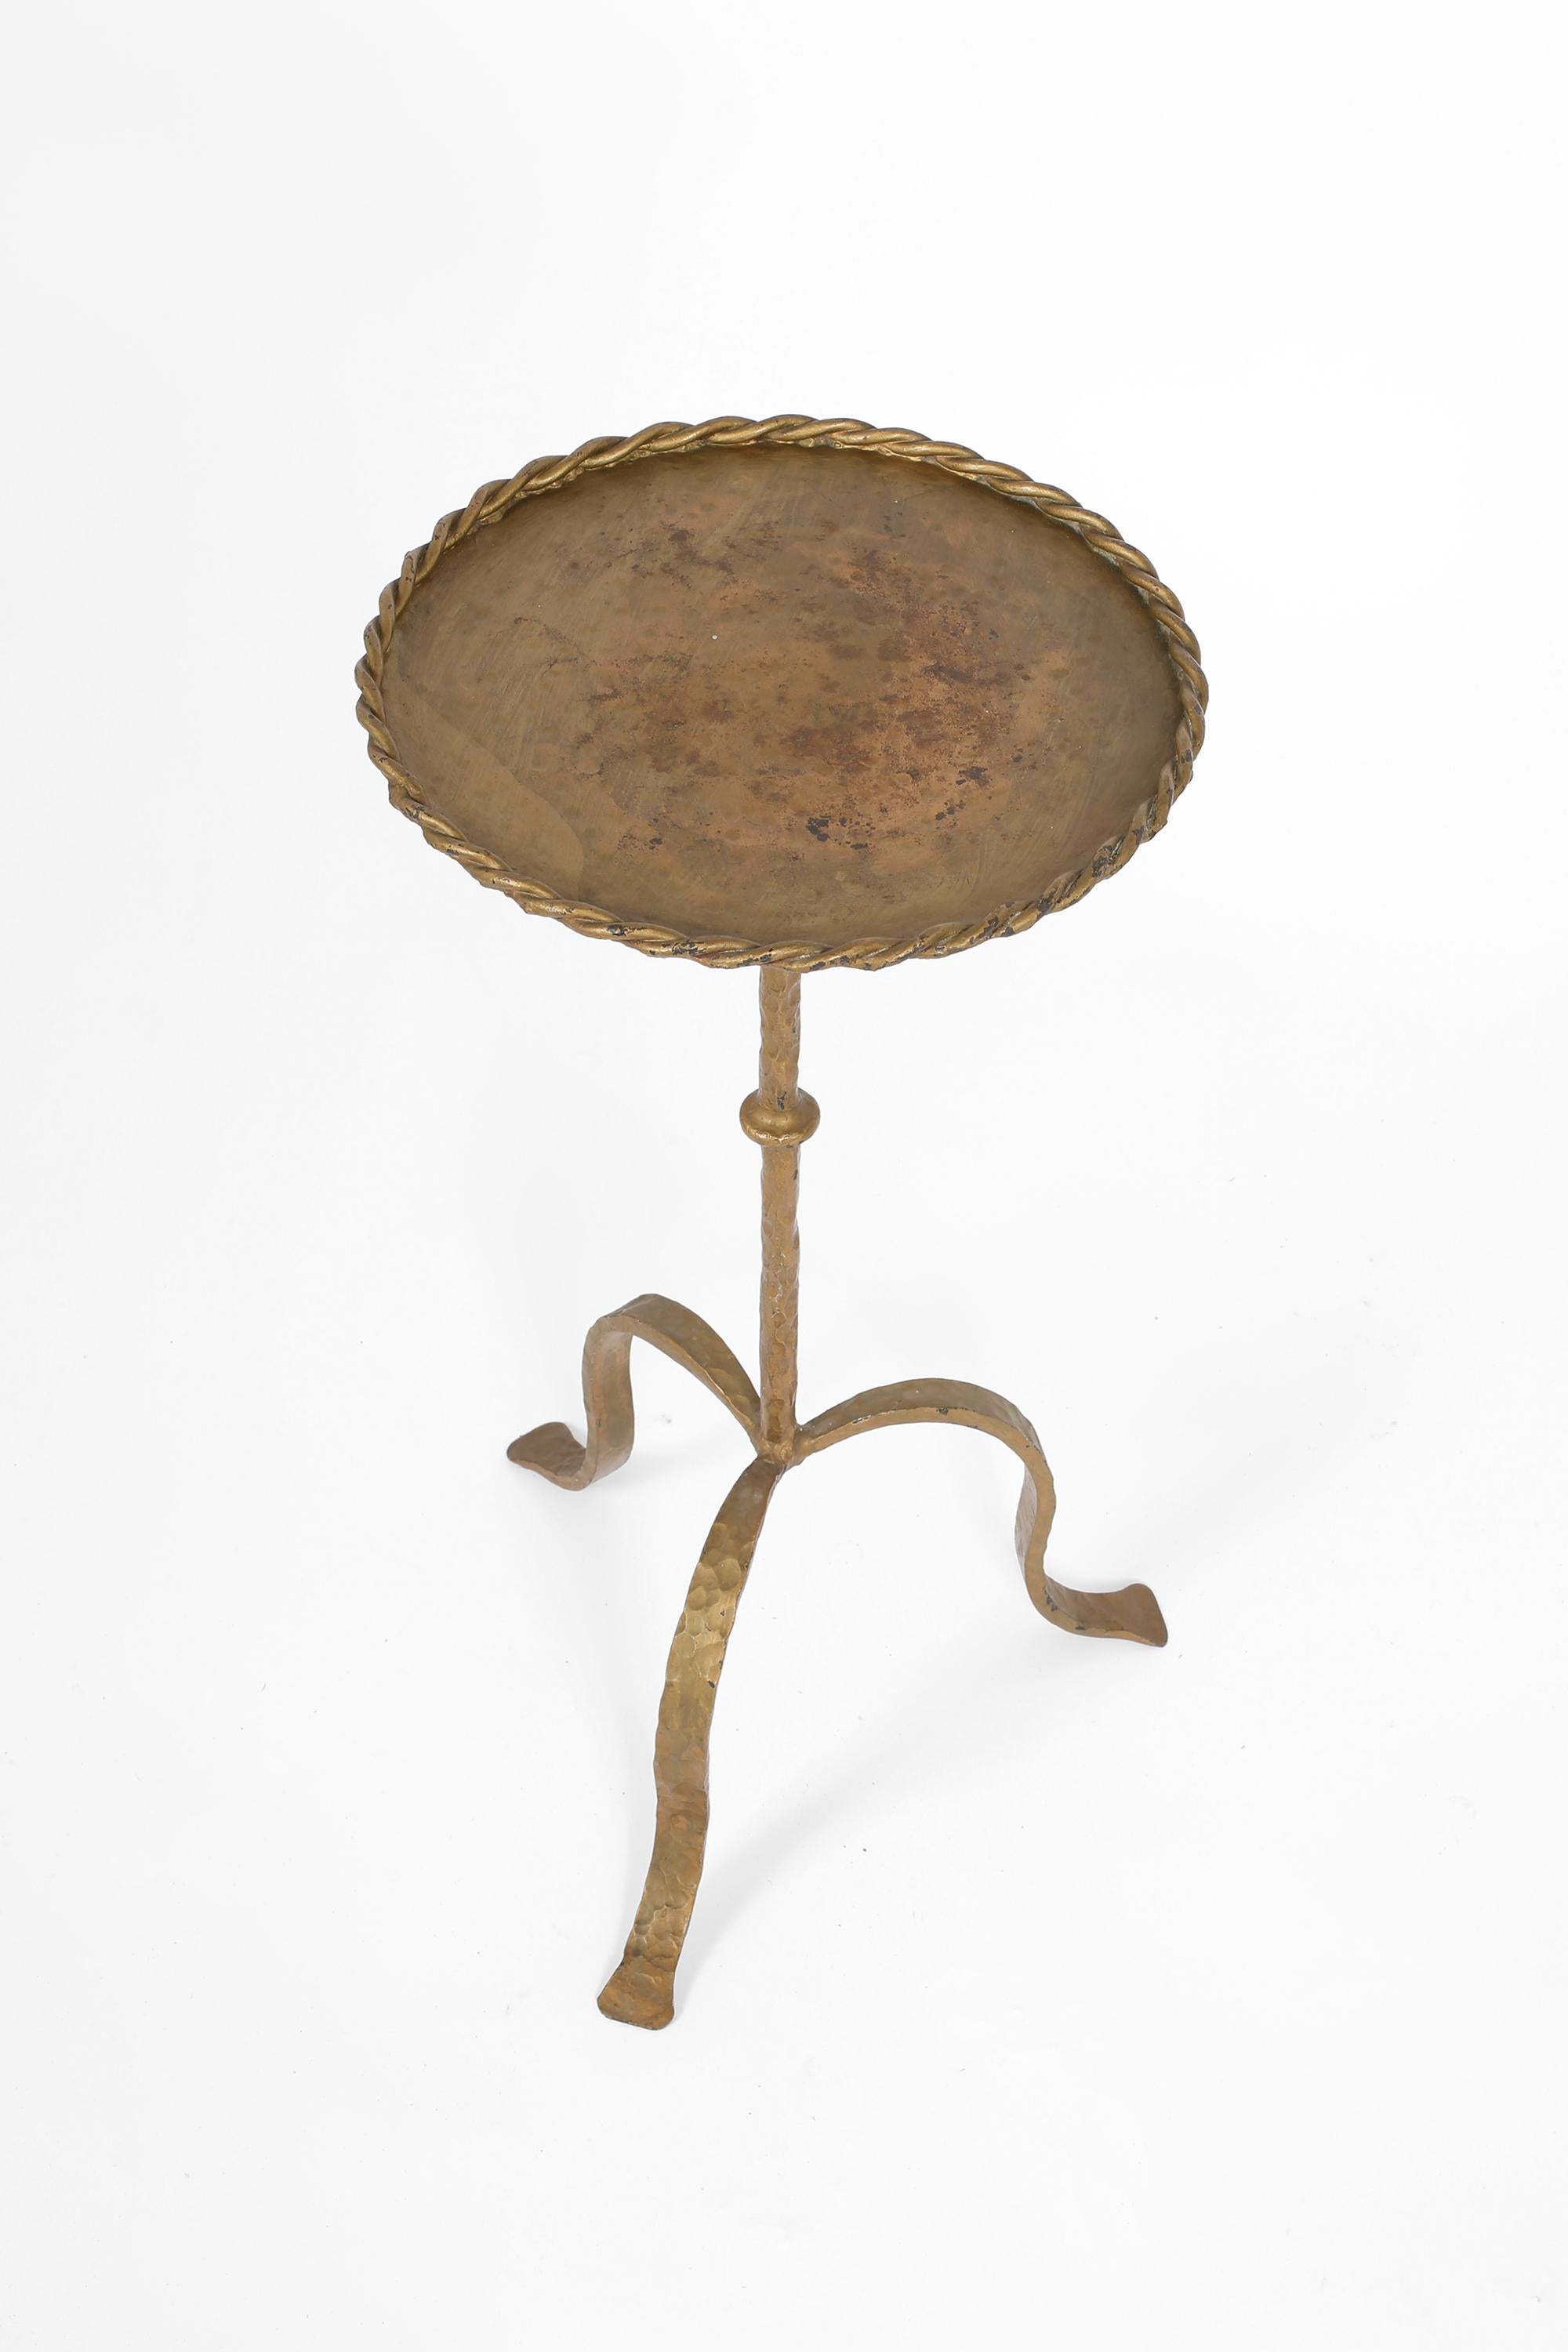 A gilt forged iron Martini table, with twisted ‘rope’ edge, beaten stem and tripod base. Spanish, c. 1950s.